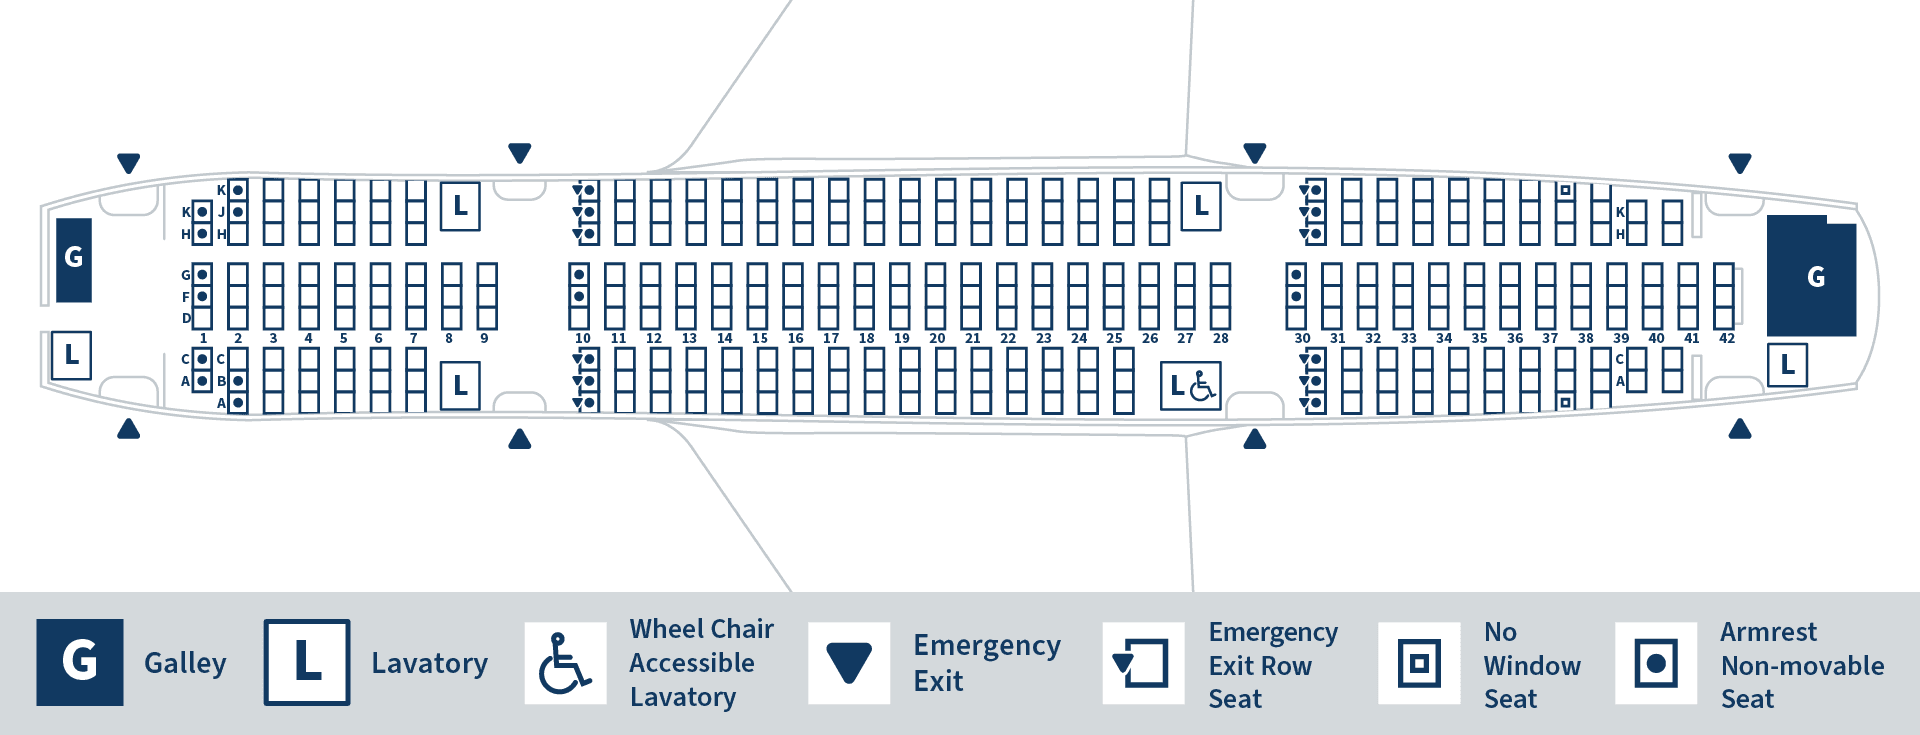 This is a seat map for the aircraft used by Air Japan.